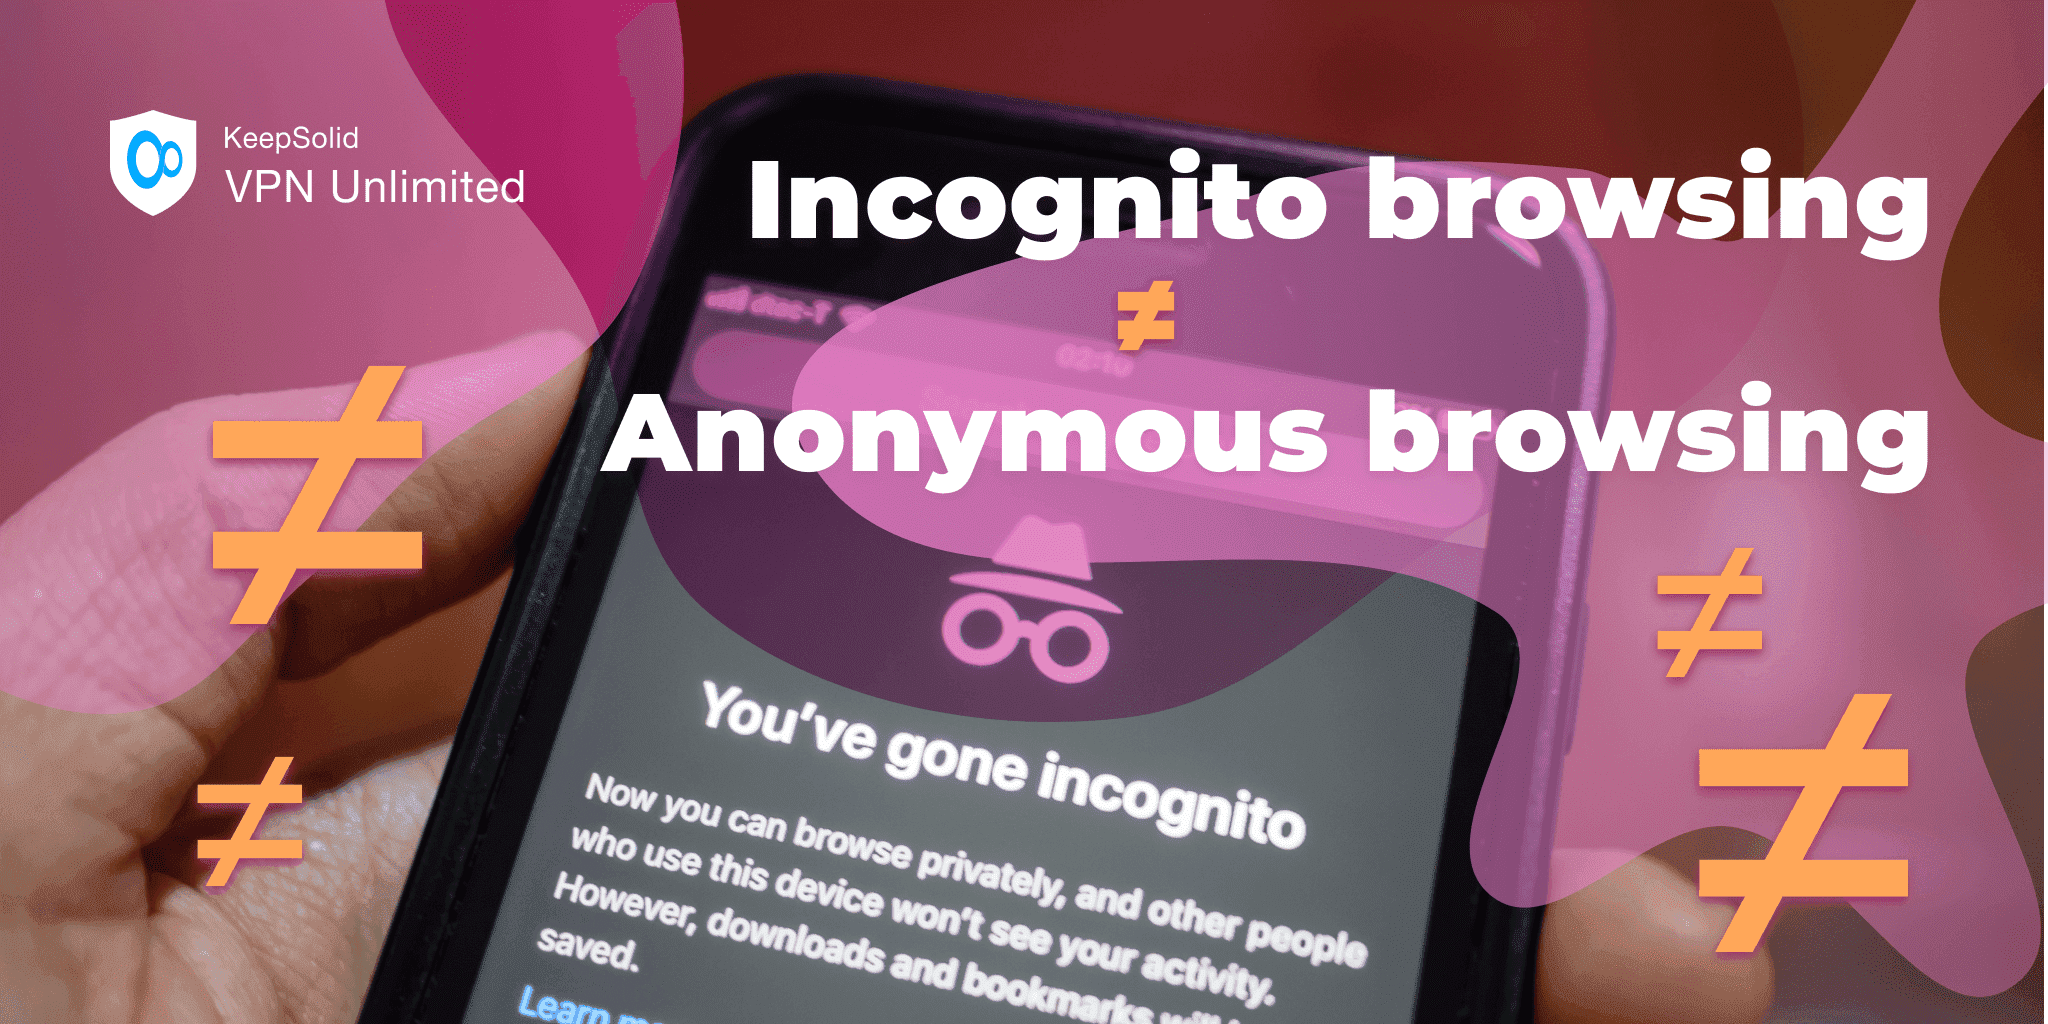 Incognito browsing on smartphone to not store porn website visits history